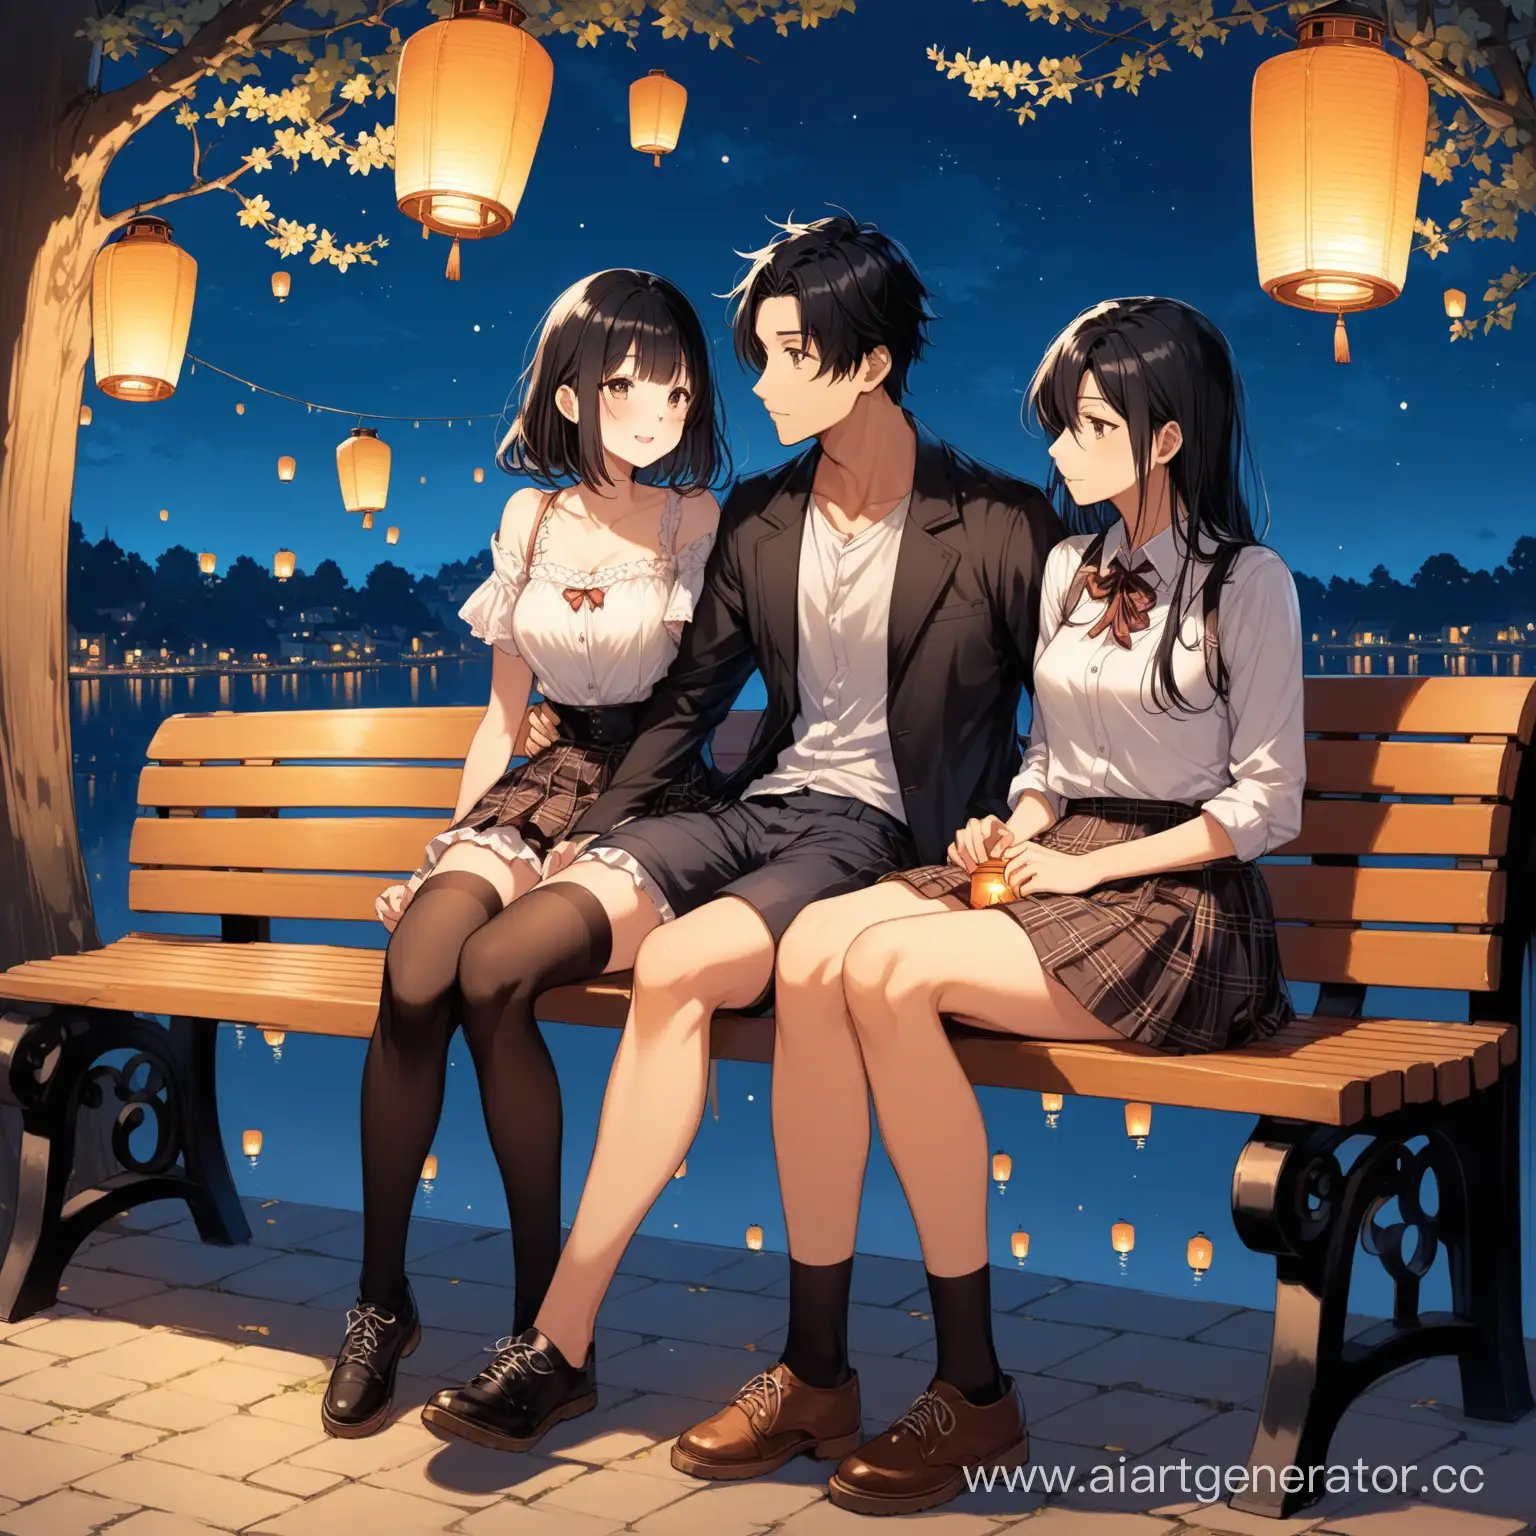 a couple is sitting on a bench, a girl has black hair, a guy is wearing shorts, a girl is wearing a skirt and stockings above them is a lantern